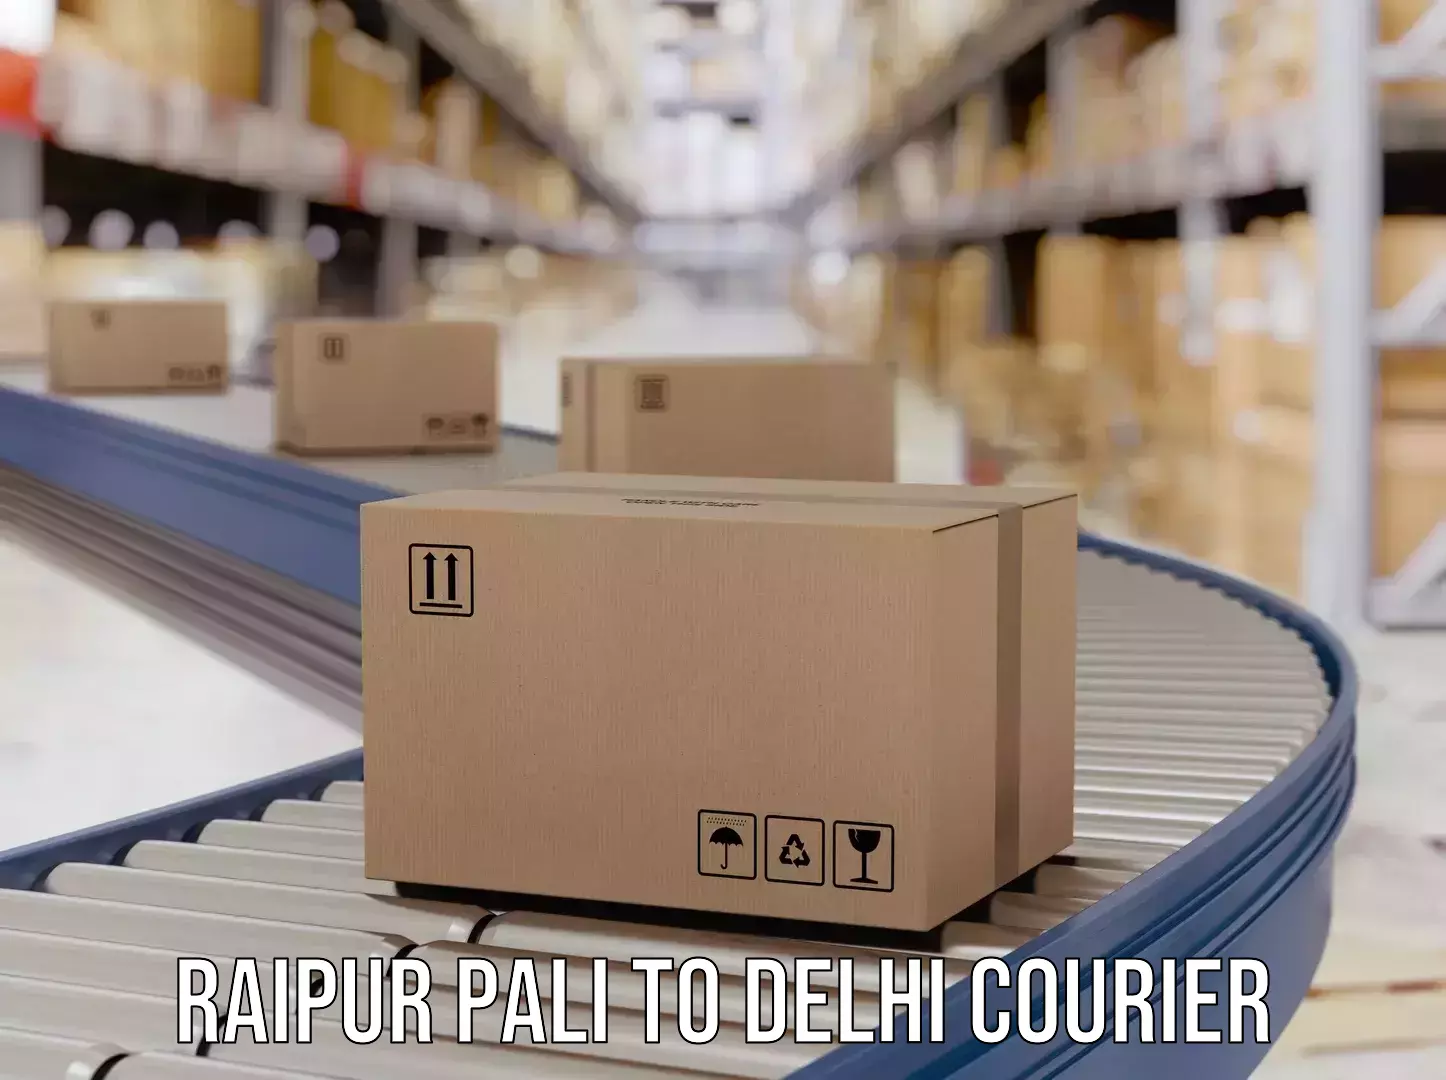 Cost-effective courier options Raipur Pali to Subhash Nagar